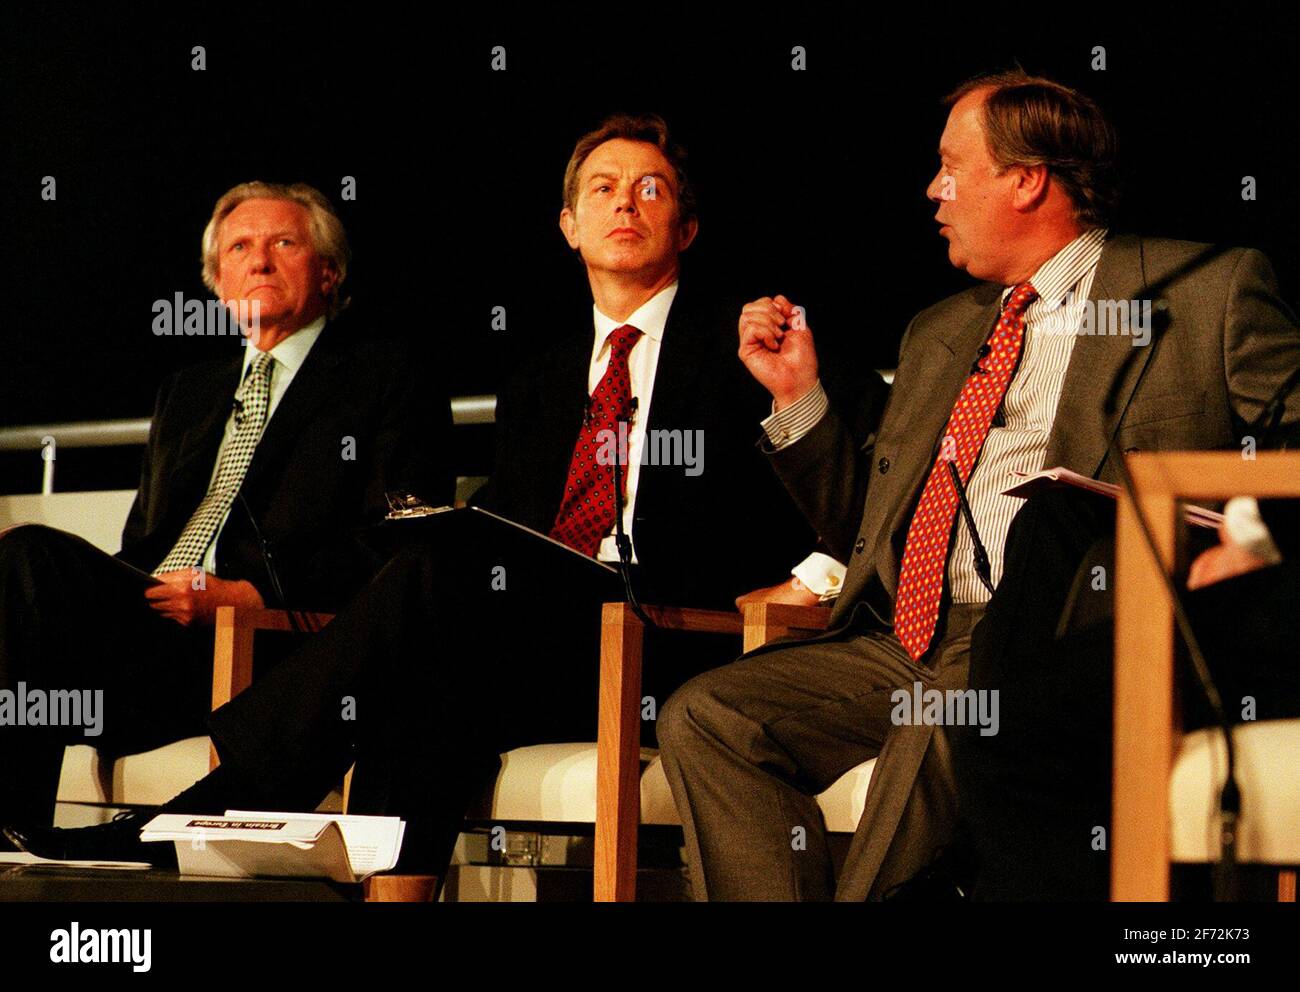 MICHAEL HESELTINE, PRIMEMINISTER TONY BLAIR AND KENNITH CLARK ON THE SAME PLATFORM TALKING ABOUT BRITAINS ROLE IN EUROPE. Stock Photo